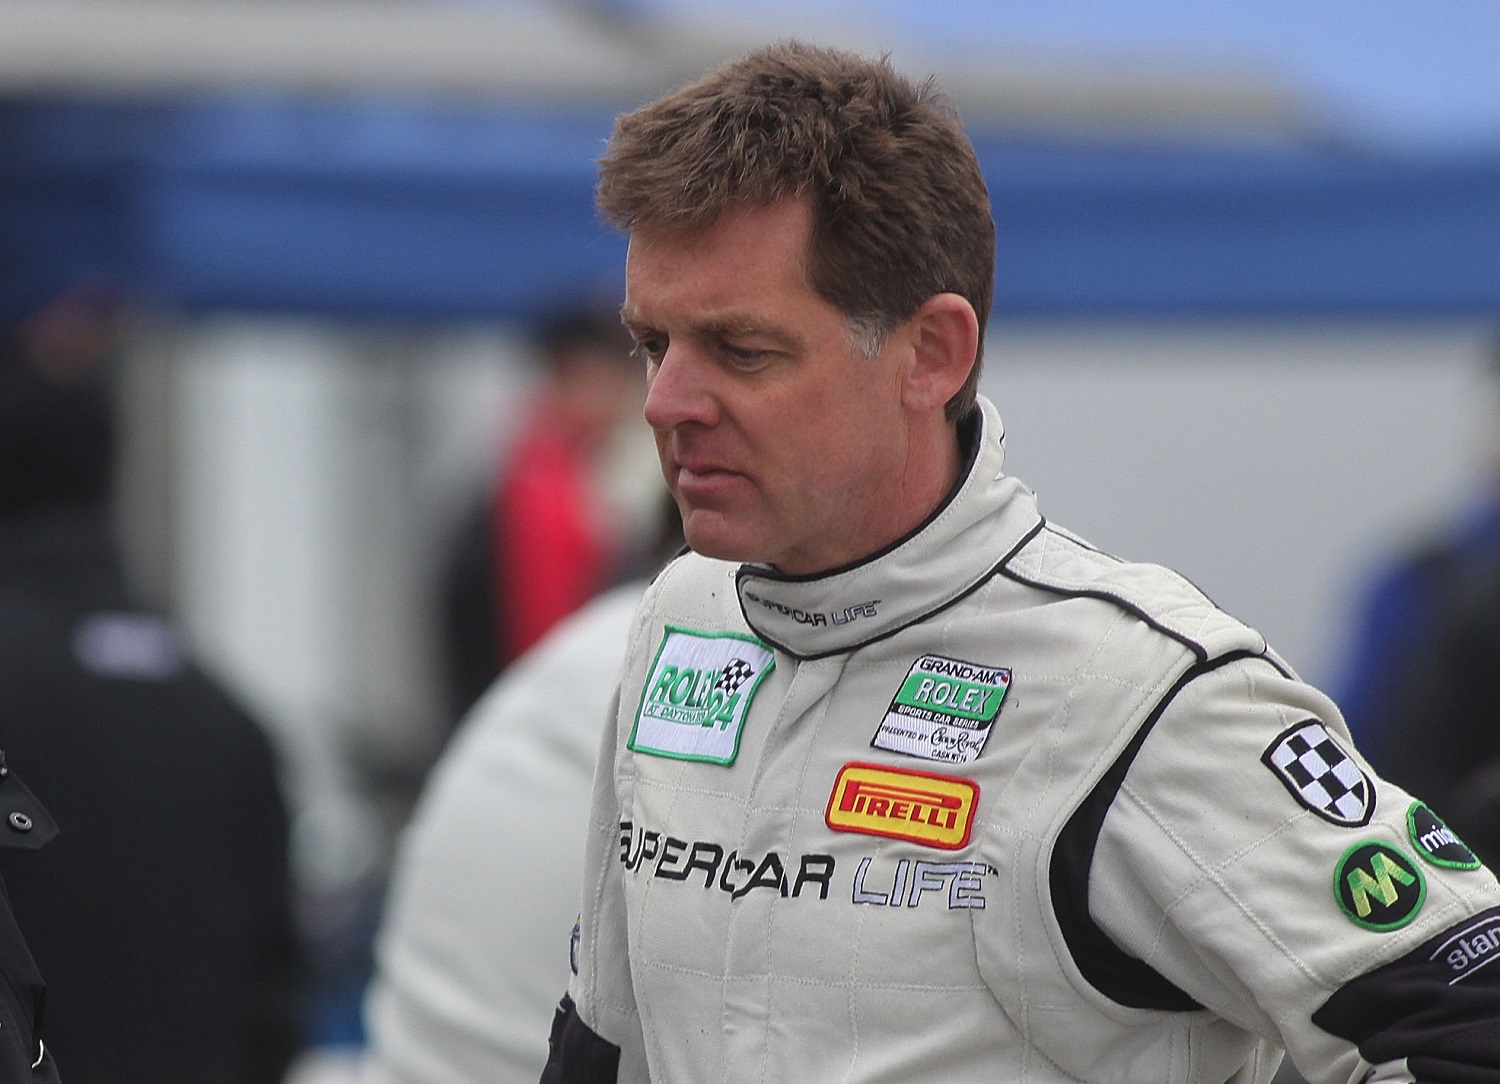 Scott Tucker was sentenced to terms in Leavenworth both before and after taking up racing at the age of 44 and becoming wildly successful in the Le Mans Series. | Brian Cleary/Getty Images